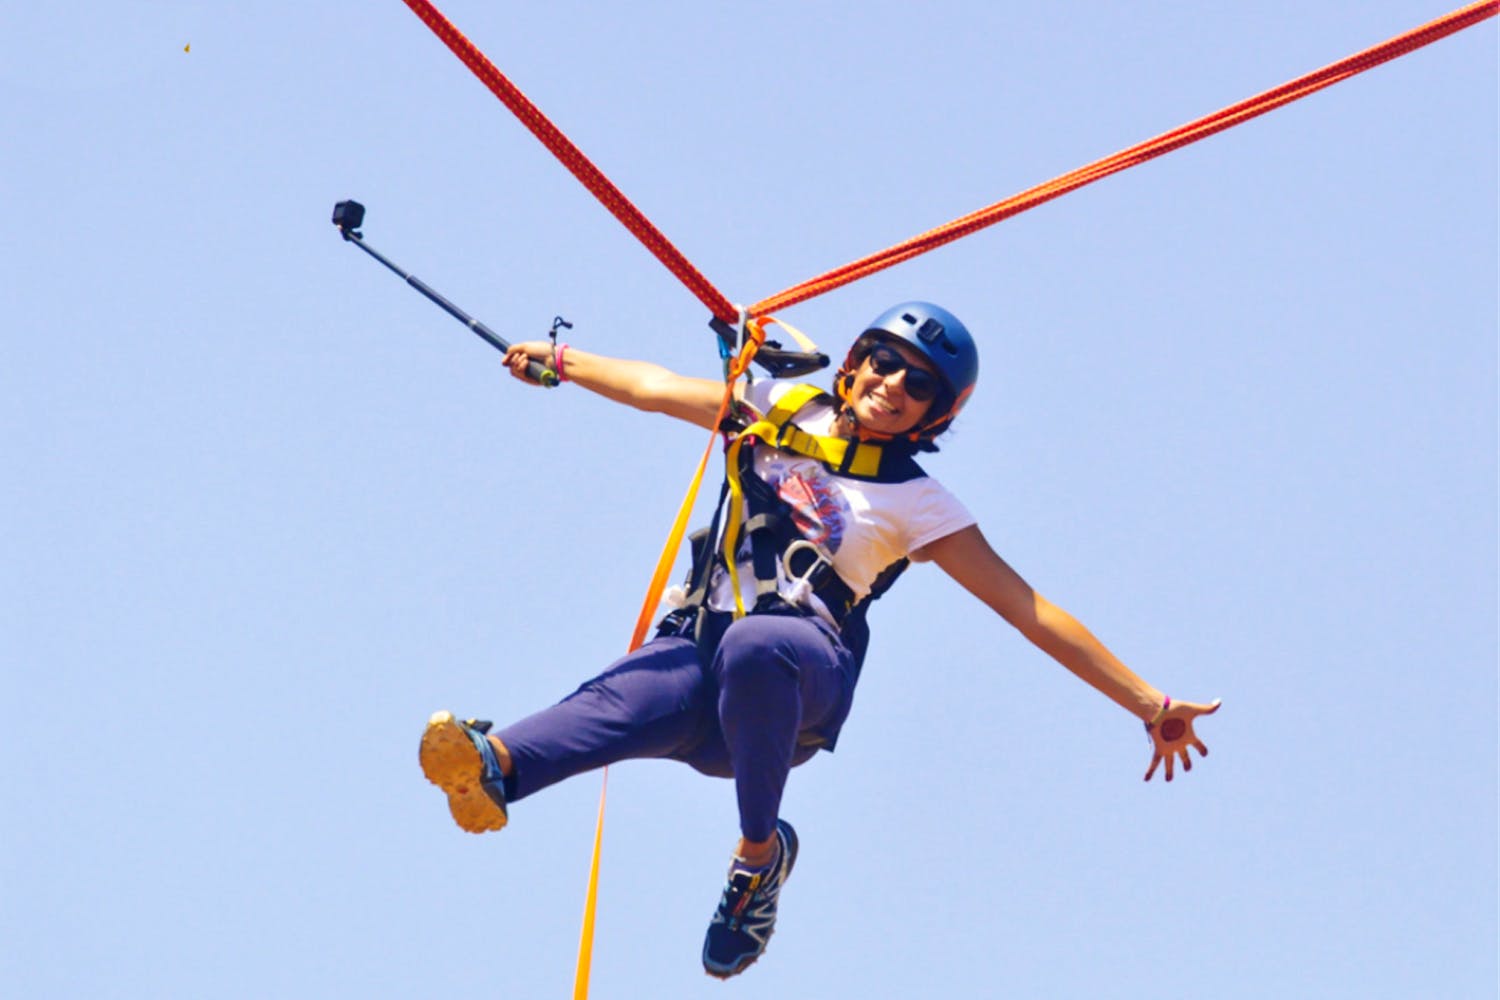 Jumping,Extreme sport,Adventure,Sports,Rope,Fun,Recreation,Bungee cord,Stunt performer,Climbing harness